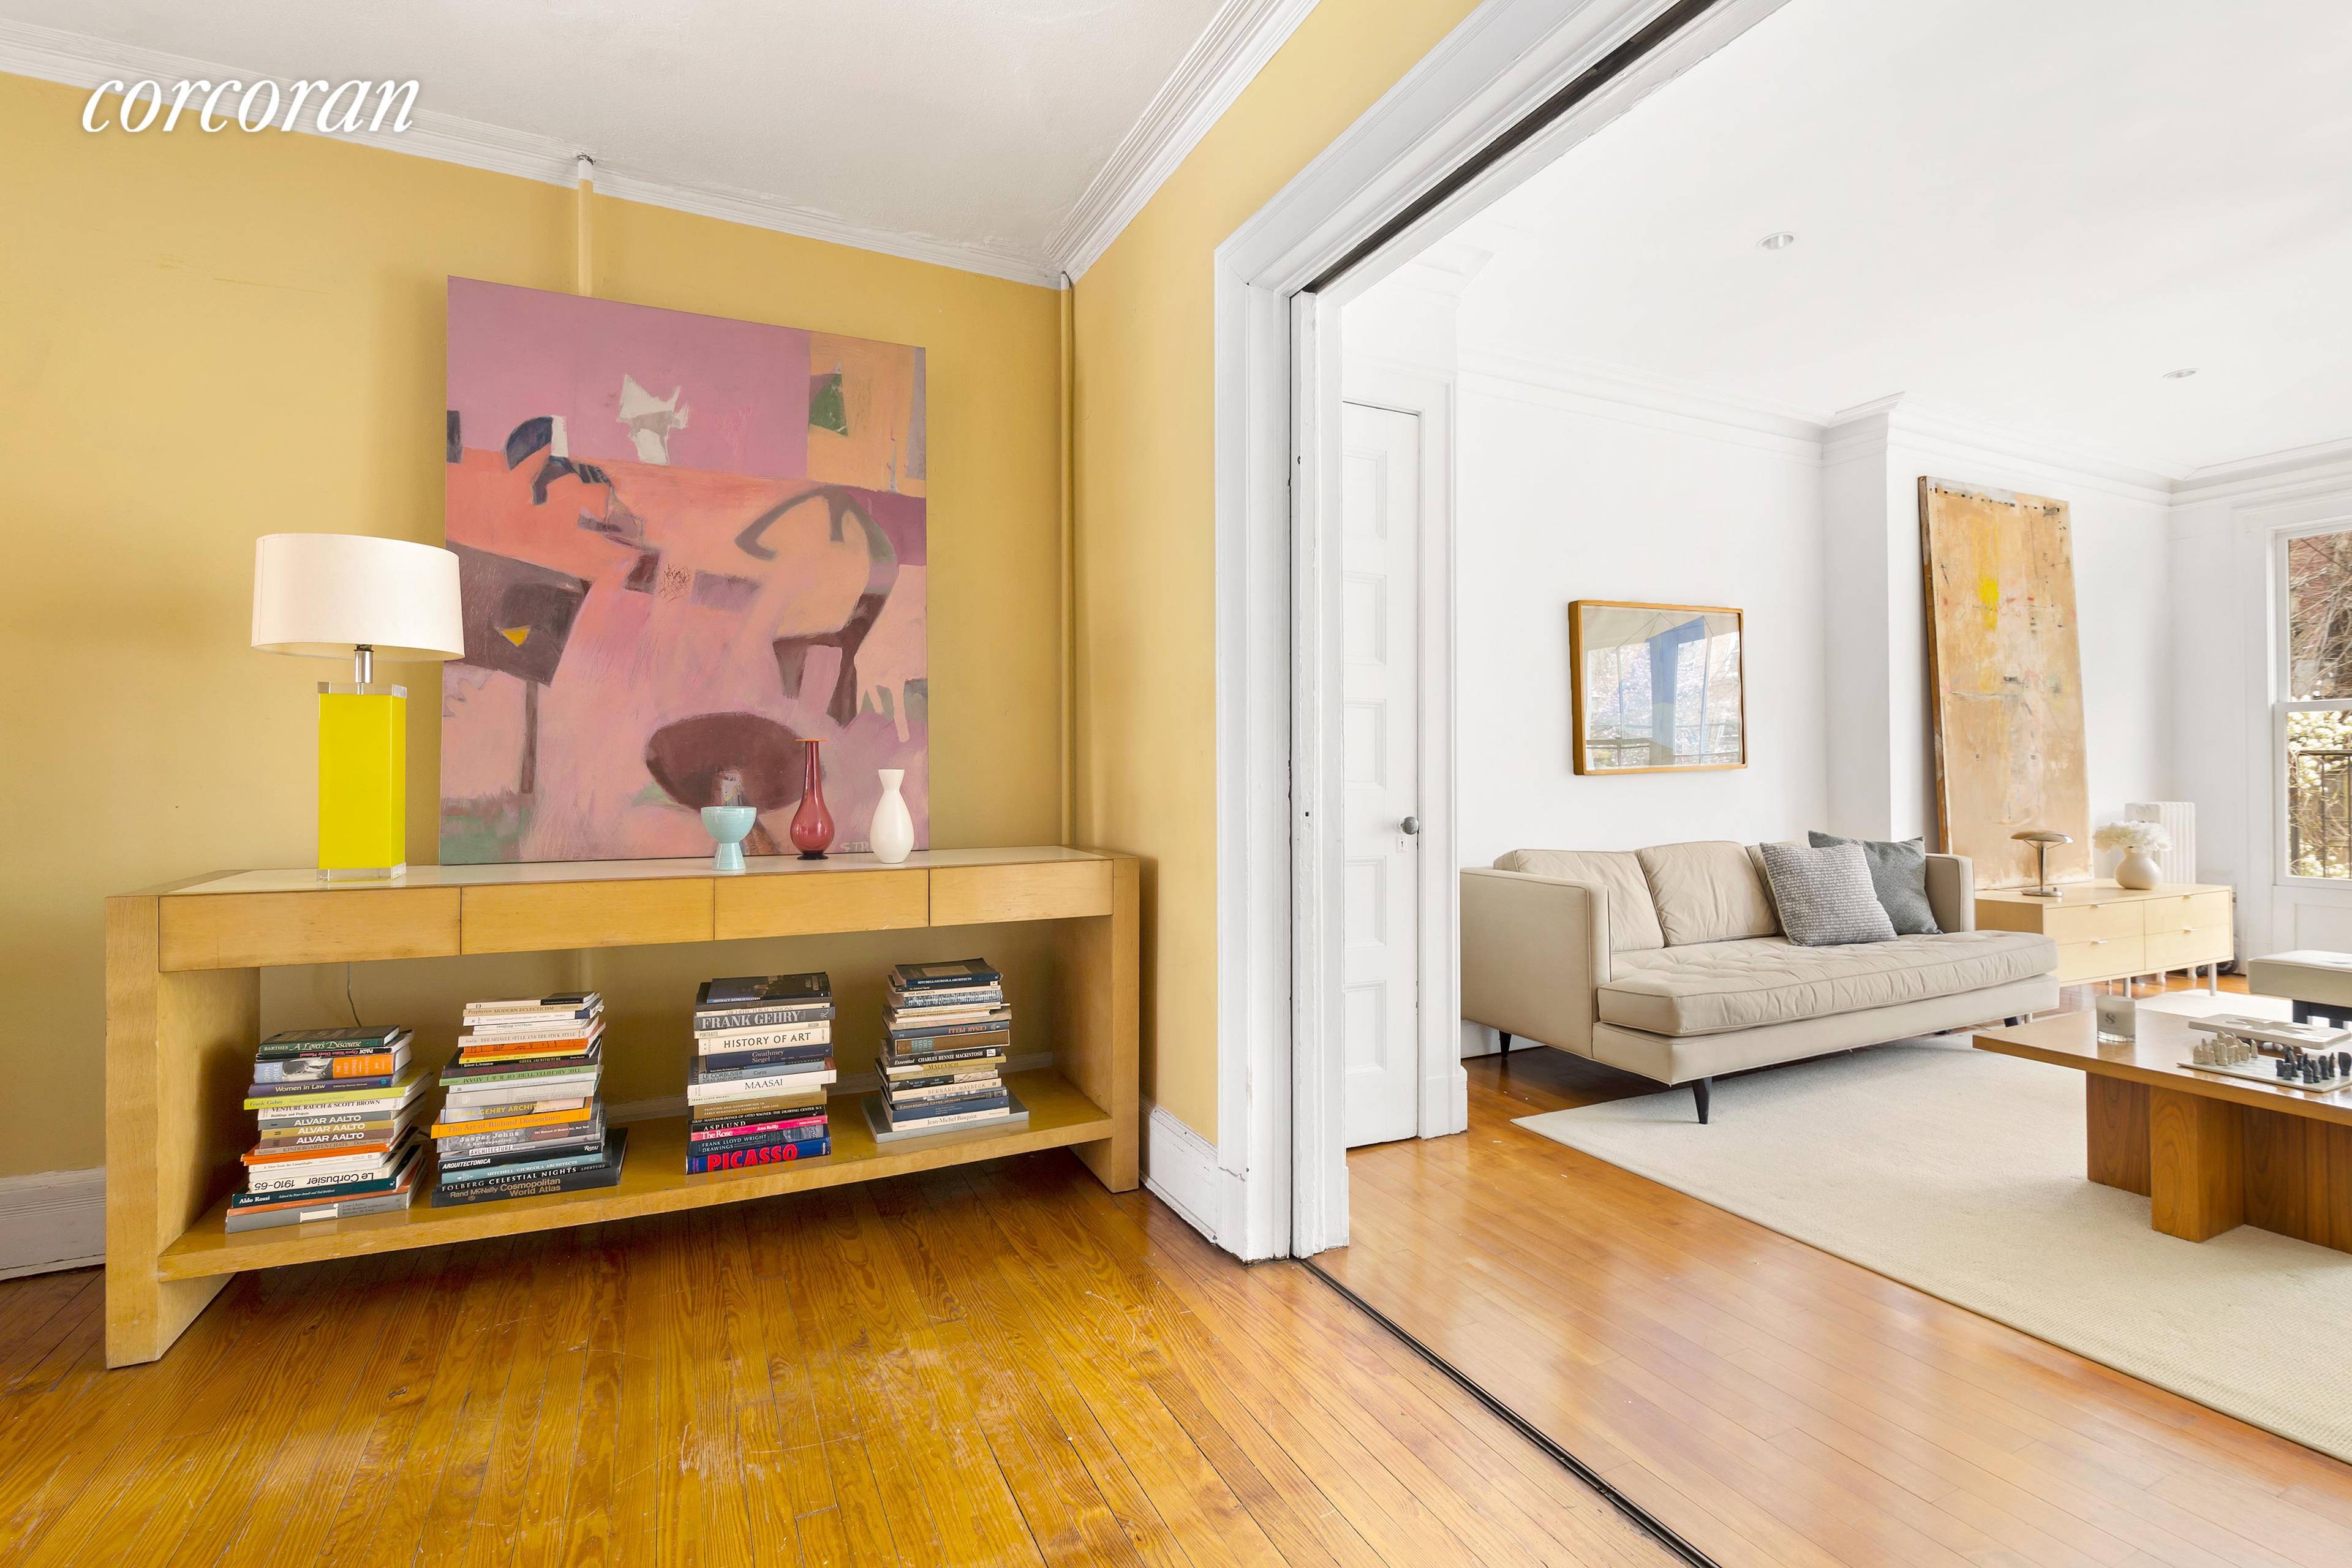 Bring your architect and contractor to this charming townhouse located on one of the most coveted blocks in Cobble Hill.